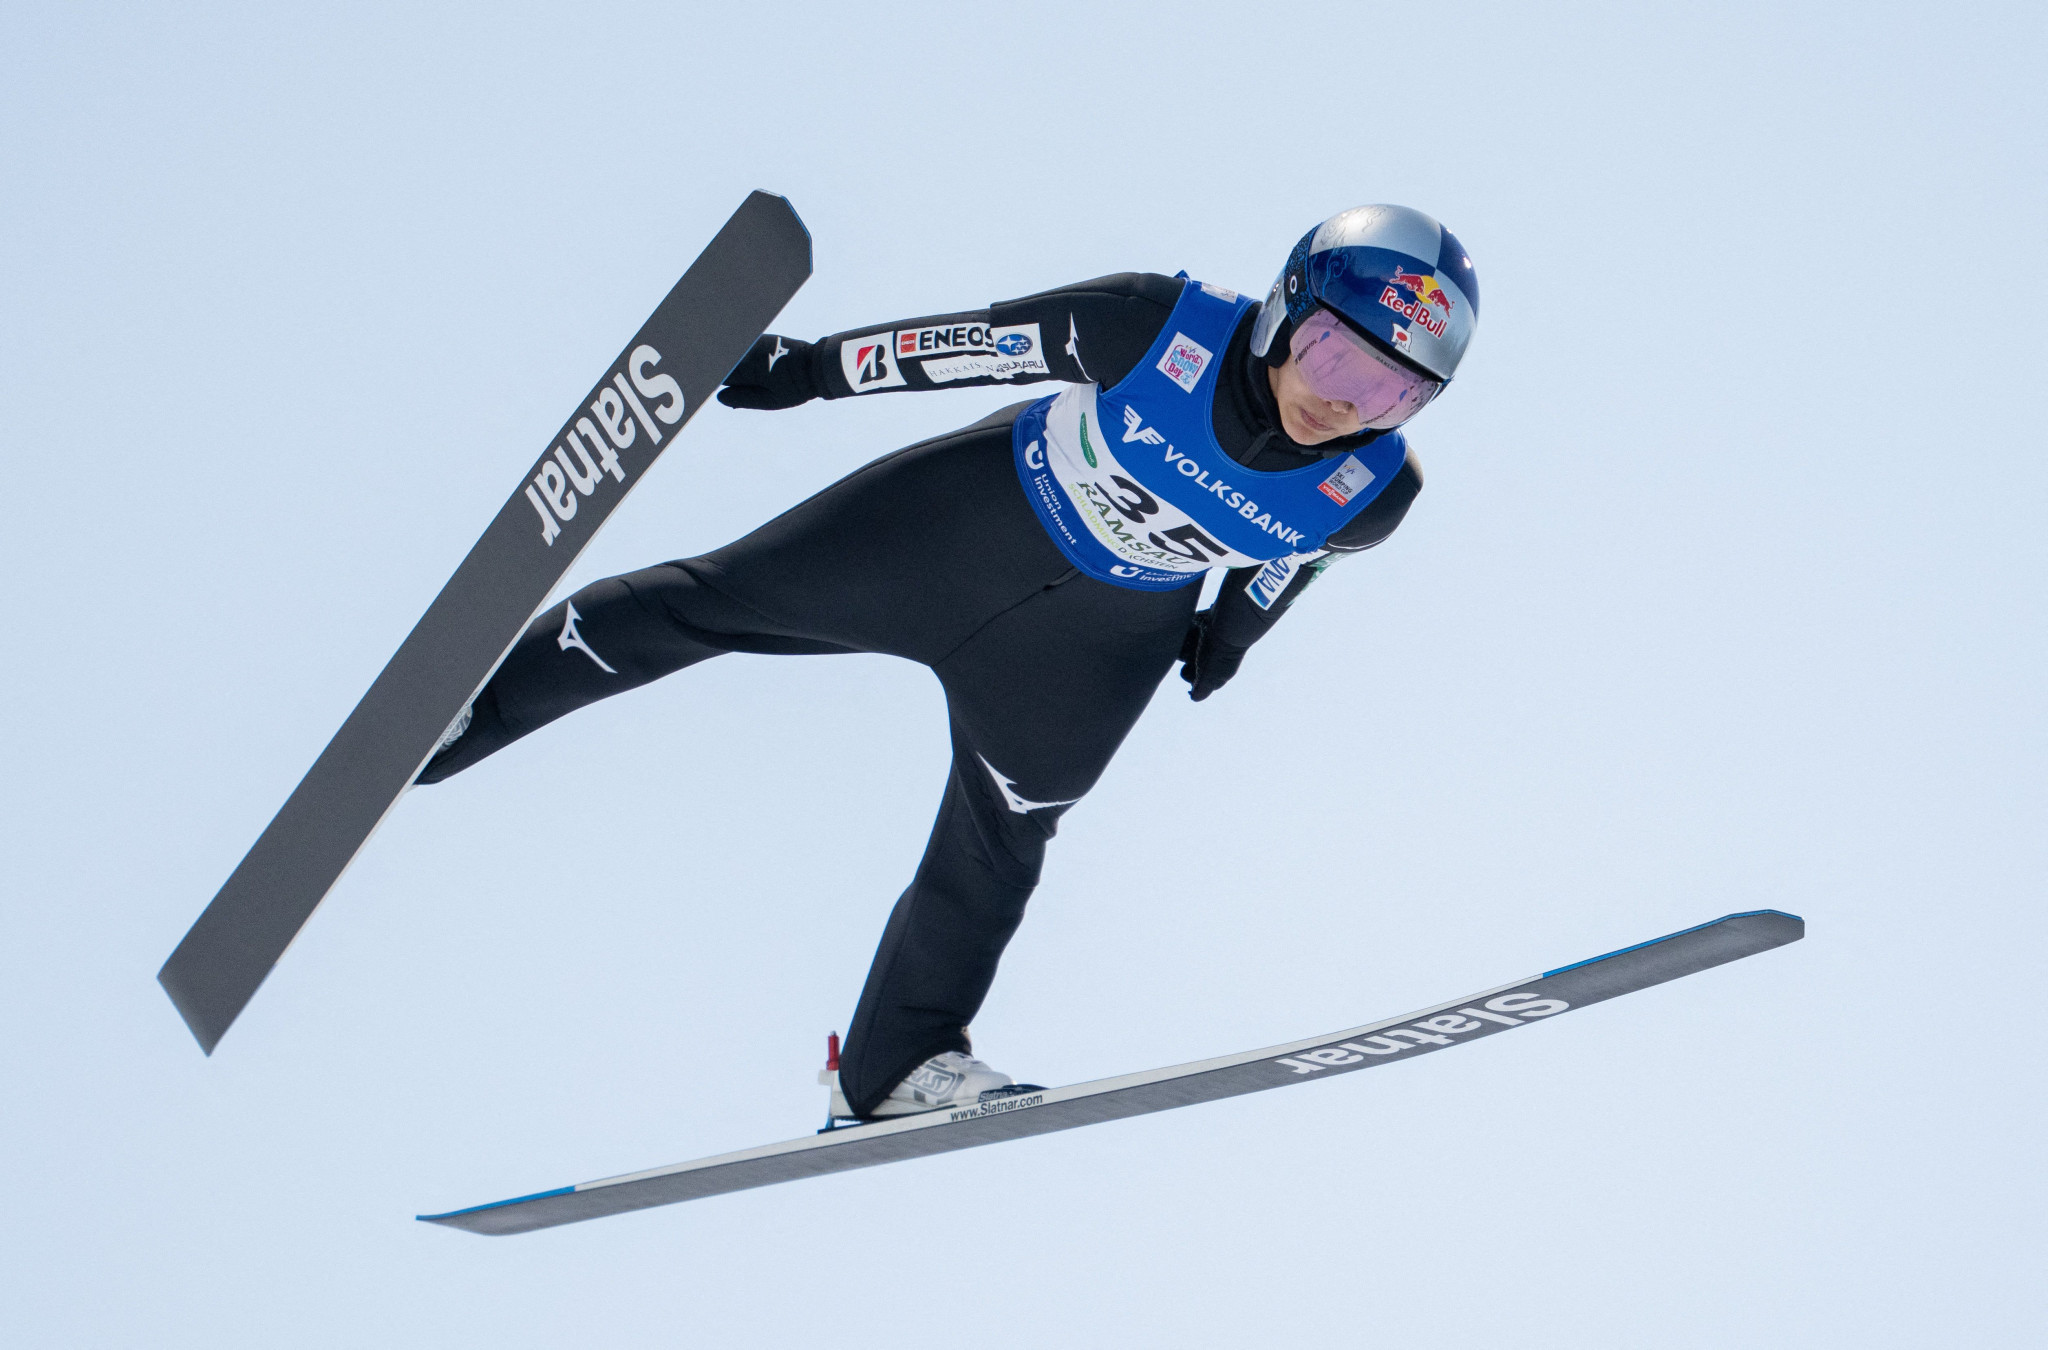 Sara Takanashi won her first FIS Ski Jumping World Cup event of the season ©Getty Images